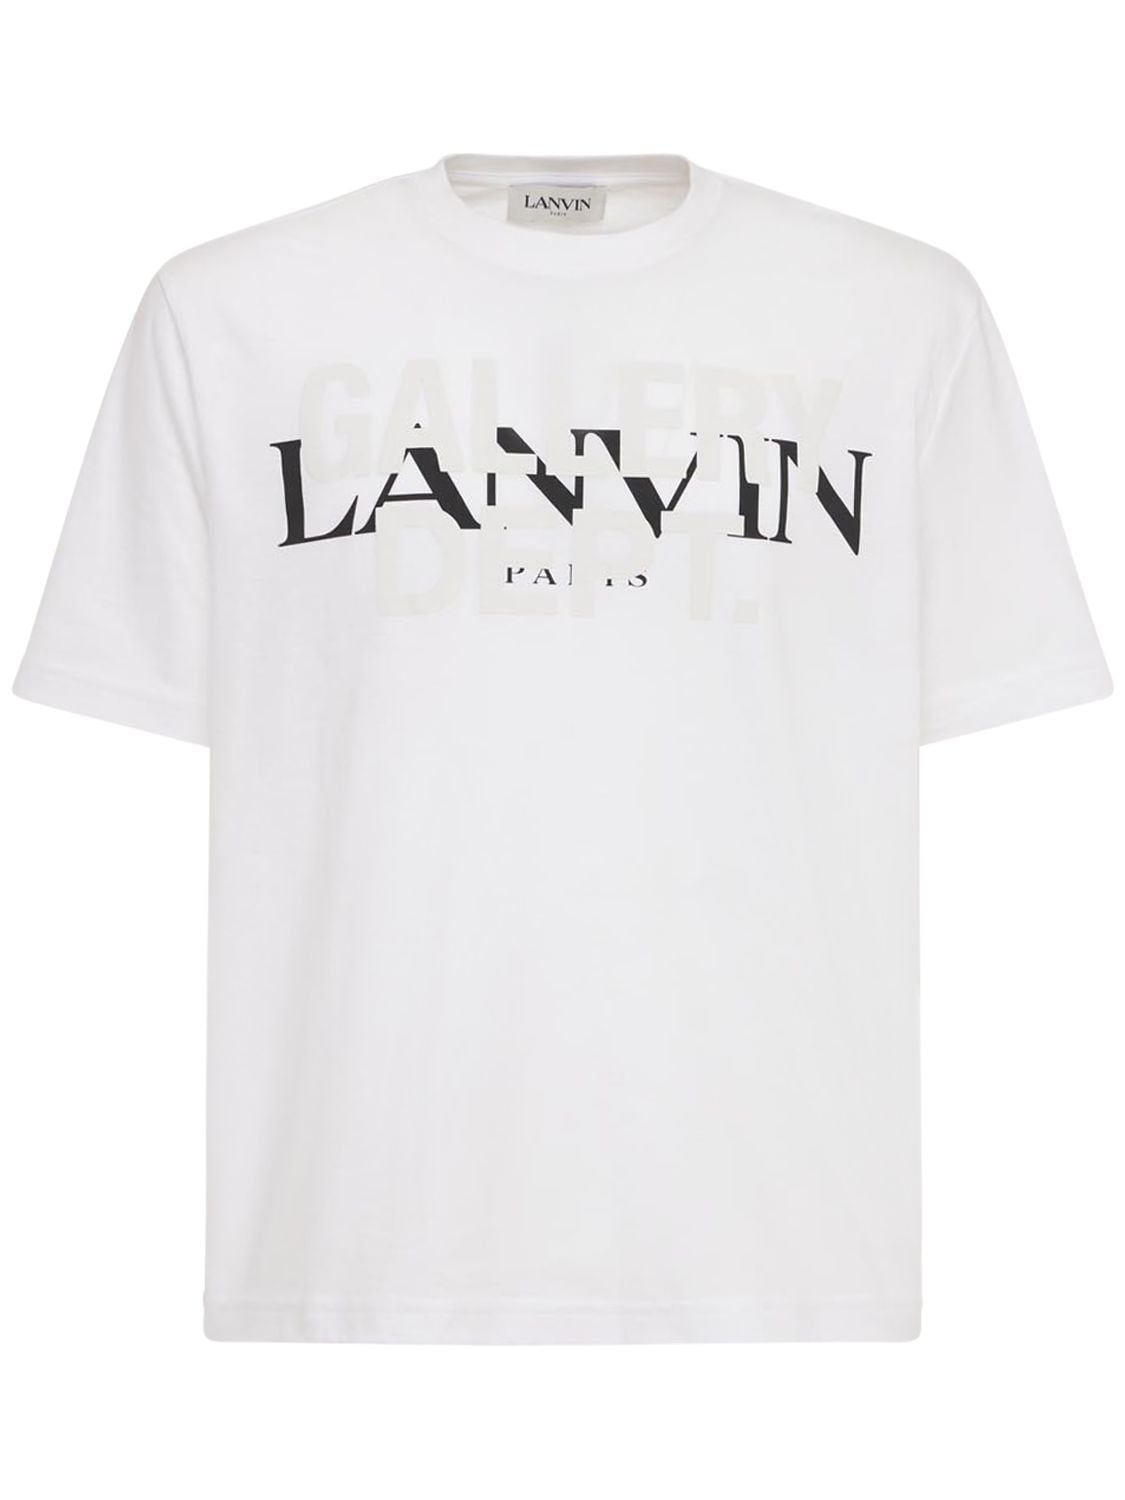 Gallery Dept. X Lanvin Printed Cotton T-shirt In White | ModeSens